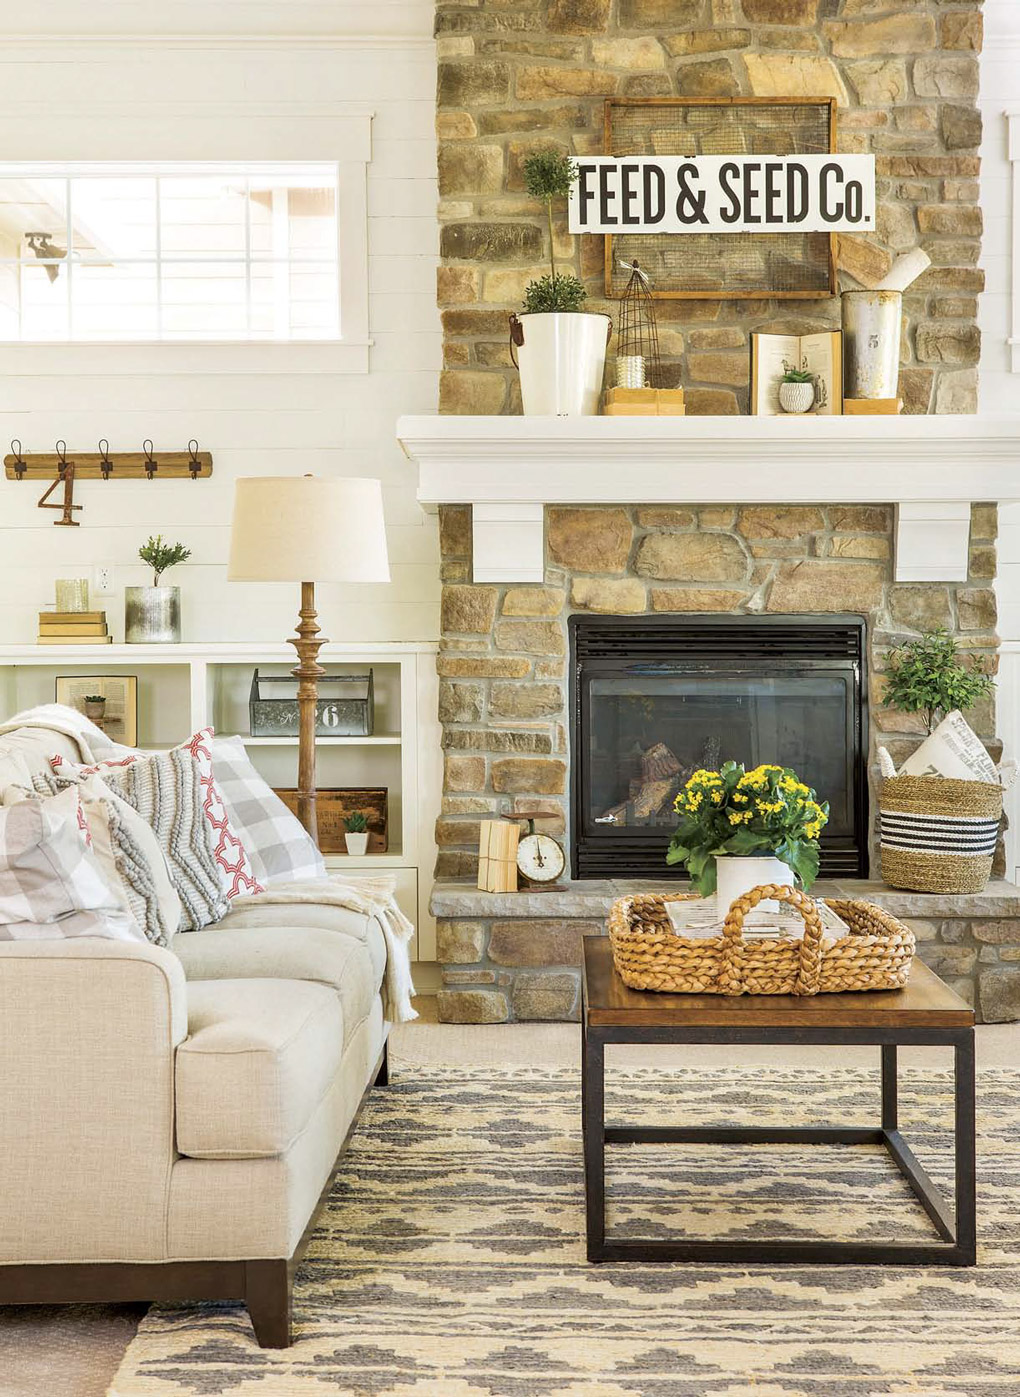 Springfield Barn Home: Delve into the details of farmhouse and cottage style.